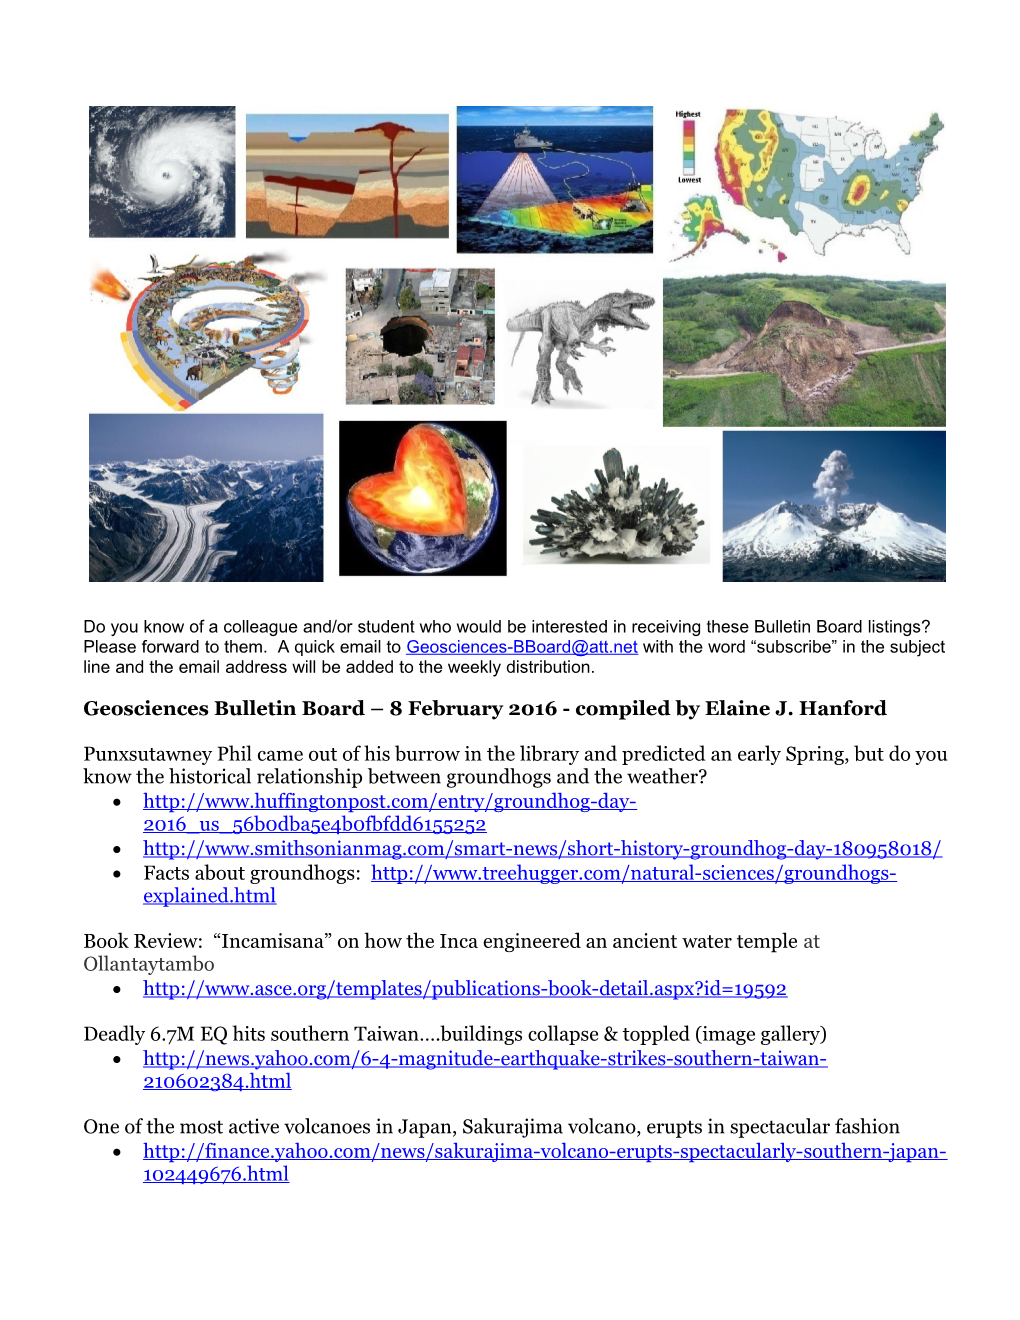 Geosciences Bulletin Board 8 February 2016- Compiled by Elaine J. Hanford